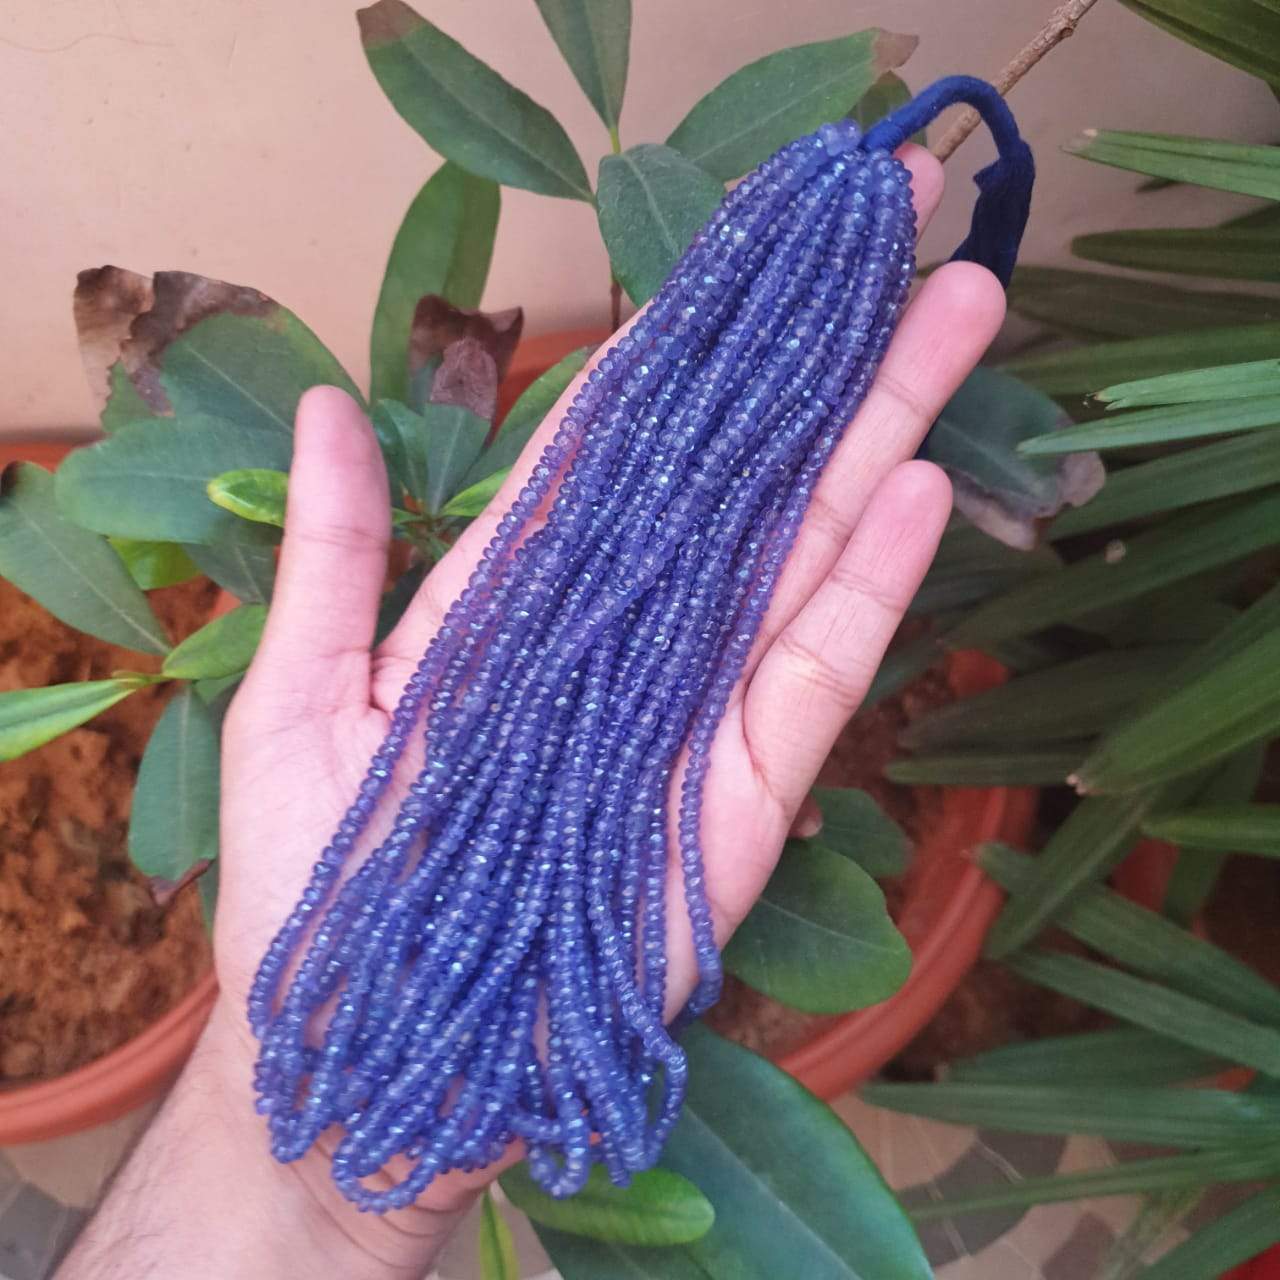 Sale🔥 Tanzanite Beads Faceted 4mm | Untreated Good Colour 14 Inches - The LabradoriteKing